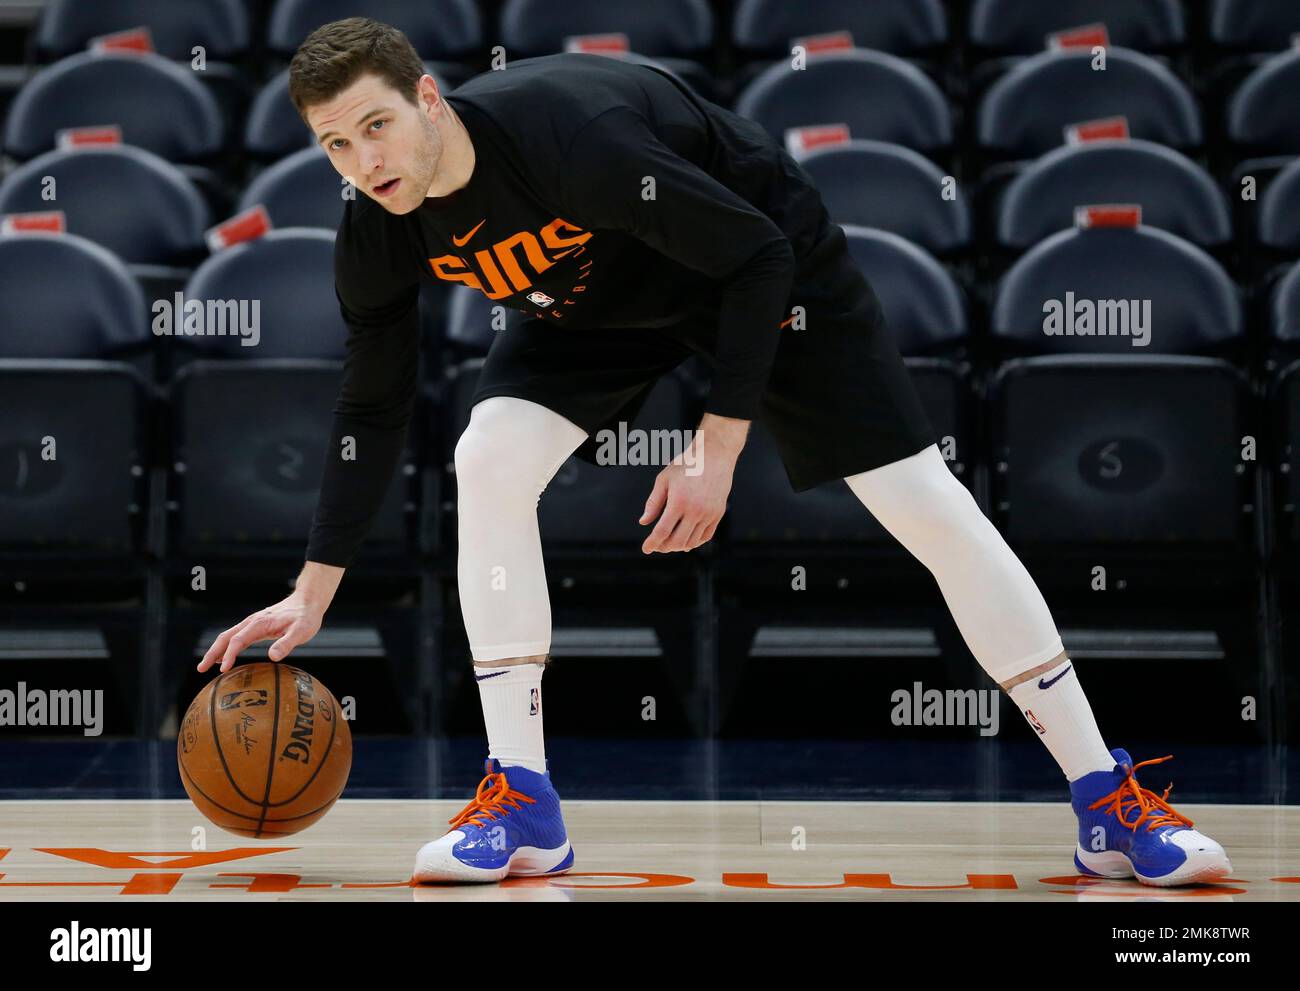 Jimmer Fredette returns to the NBA, signing with the Phoenix Suns